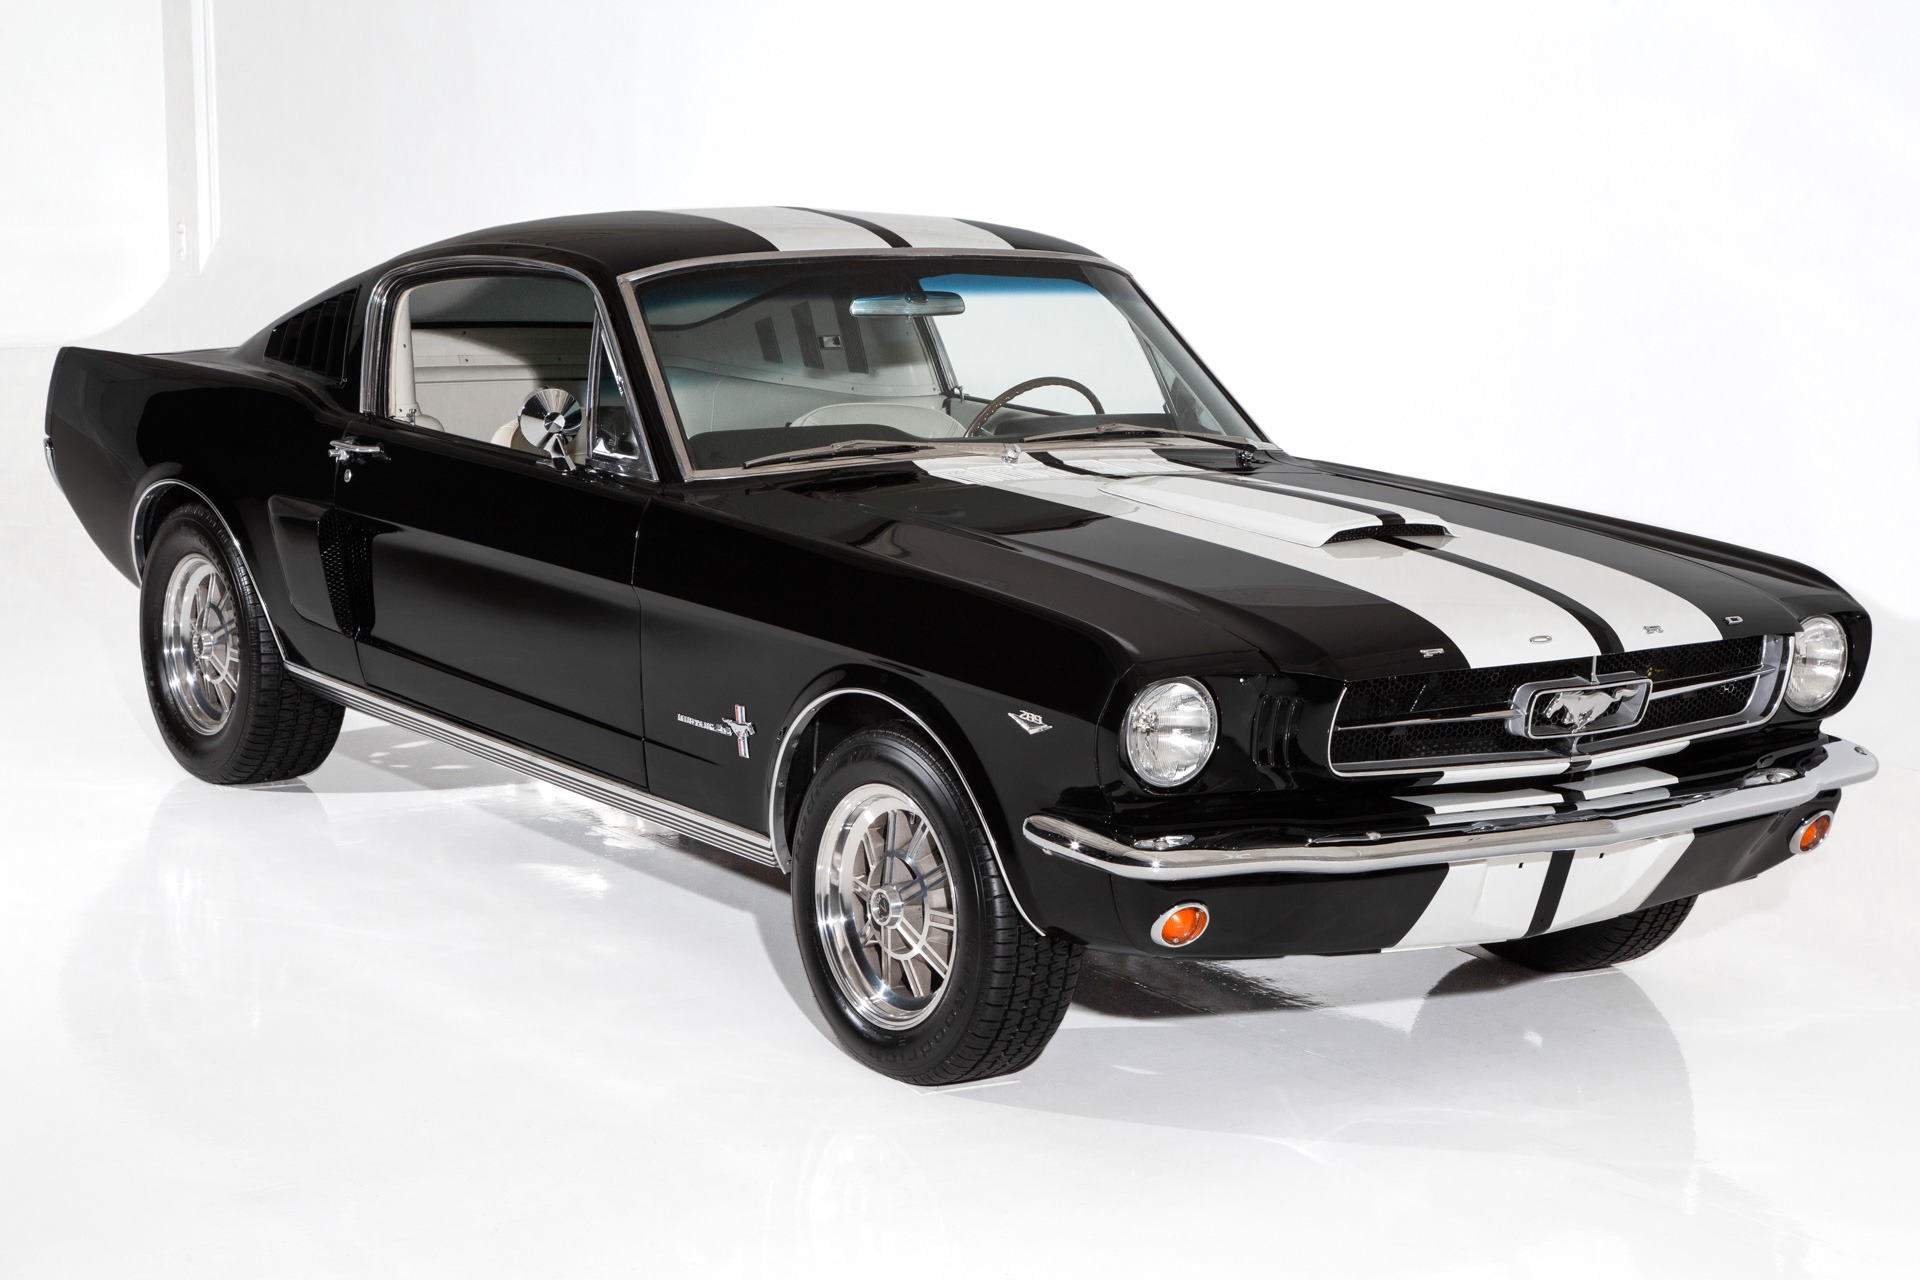 For Sale Used 1965 Ford Mustang Black & White 4-Spd PS PW Disc AC | American Dream Machines Des Moines IA 50309